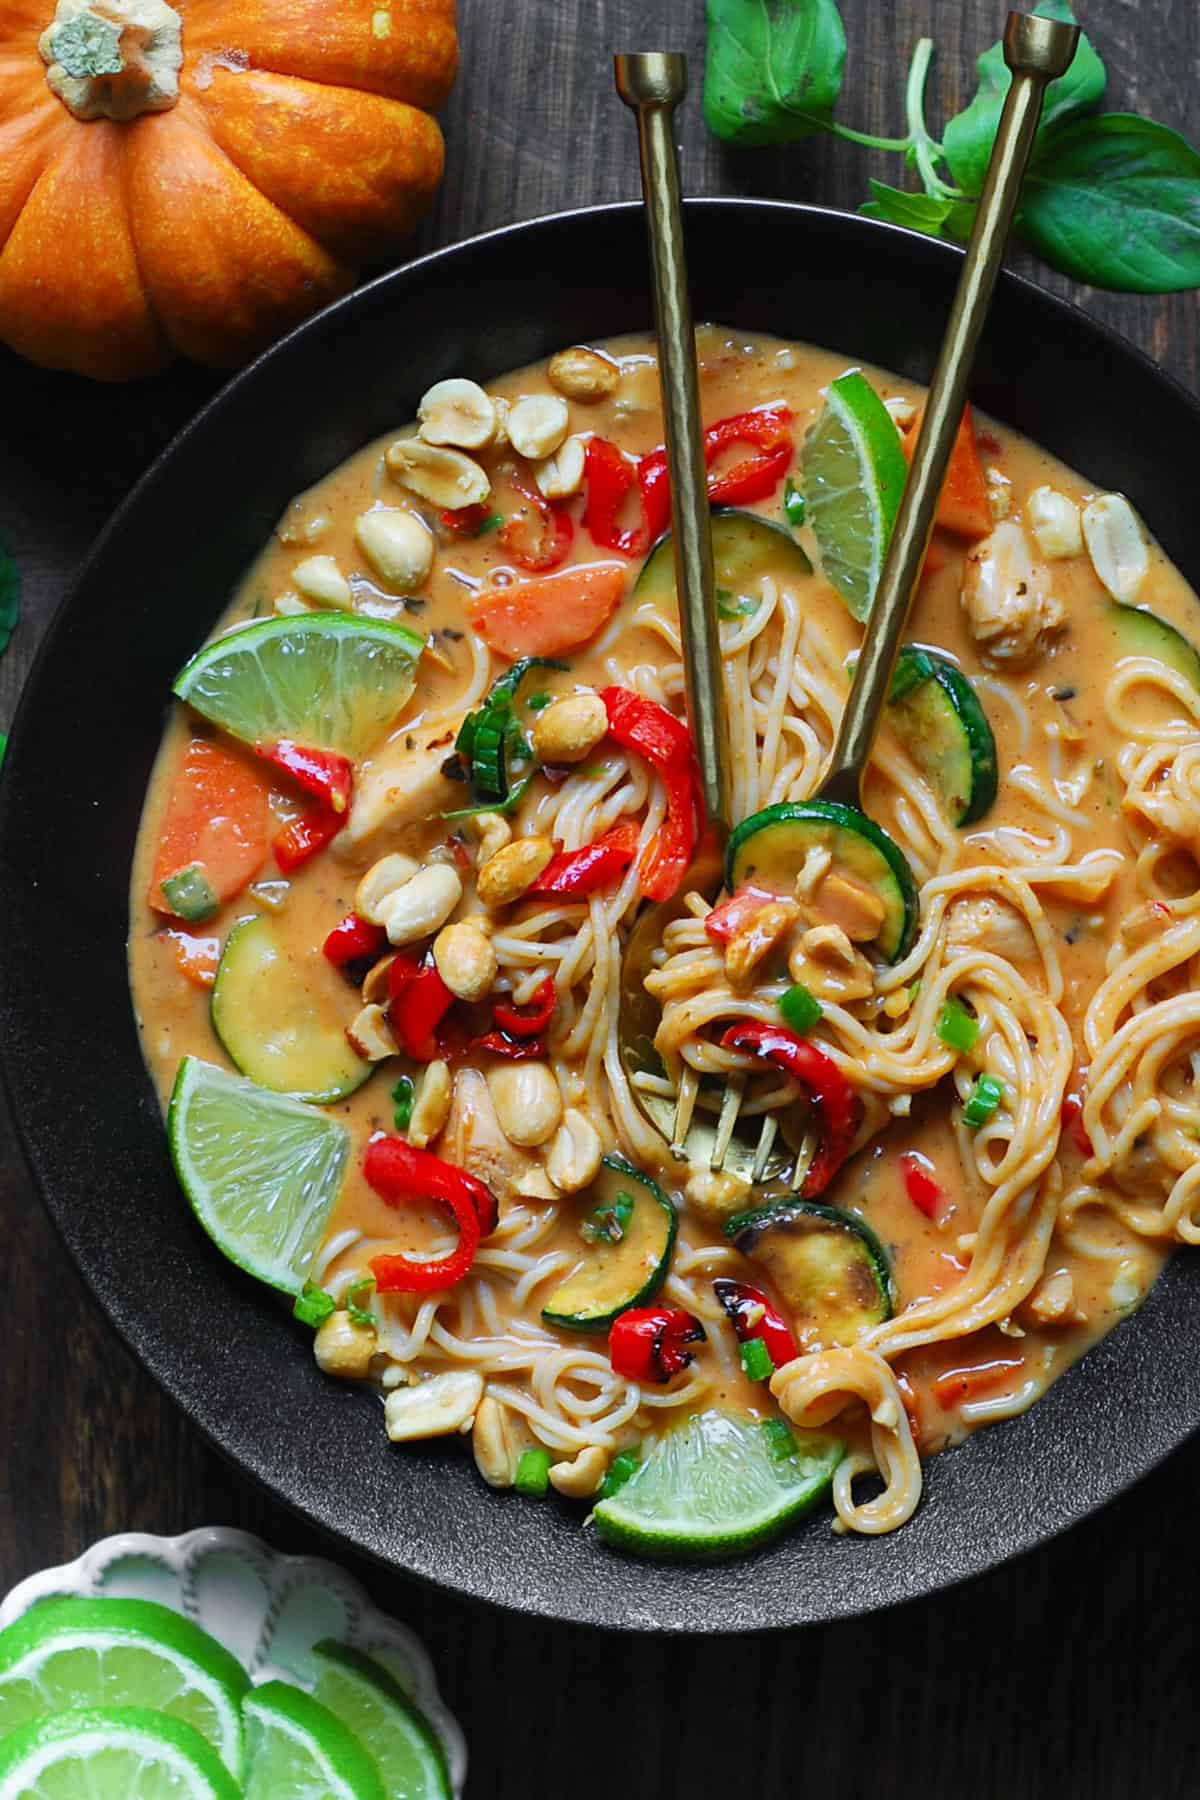 Thai-inspired Red Curry Noodle Soup with chicken, coconut broth, lime juice, red bell peppers, zucchini, carrots, and peanuts - in a black bowl.